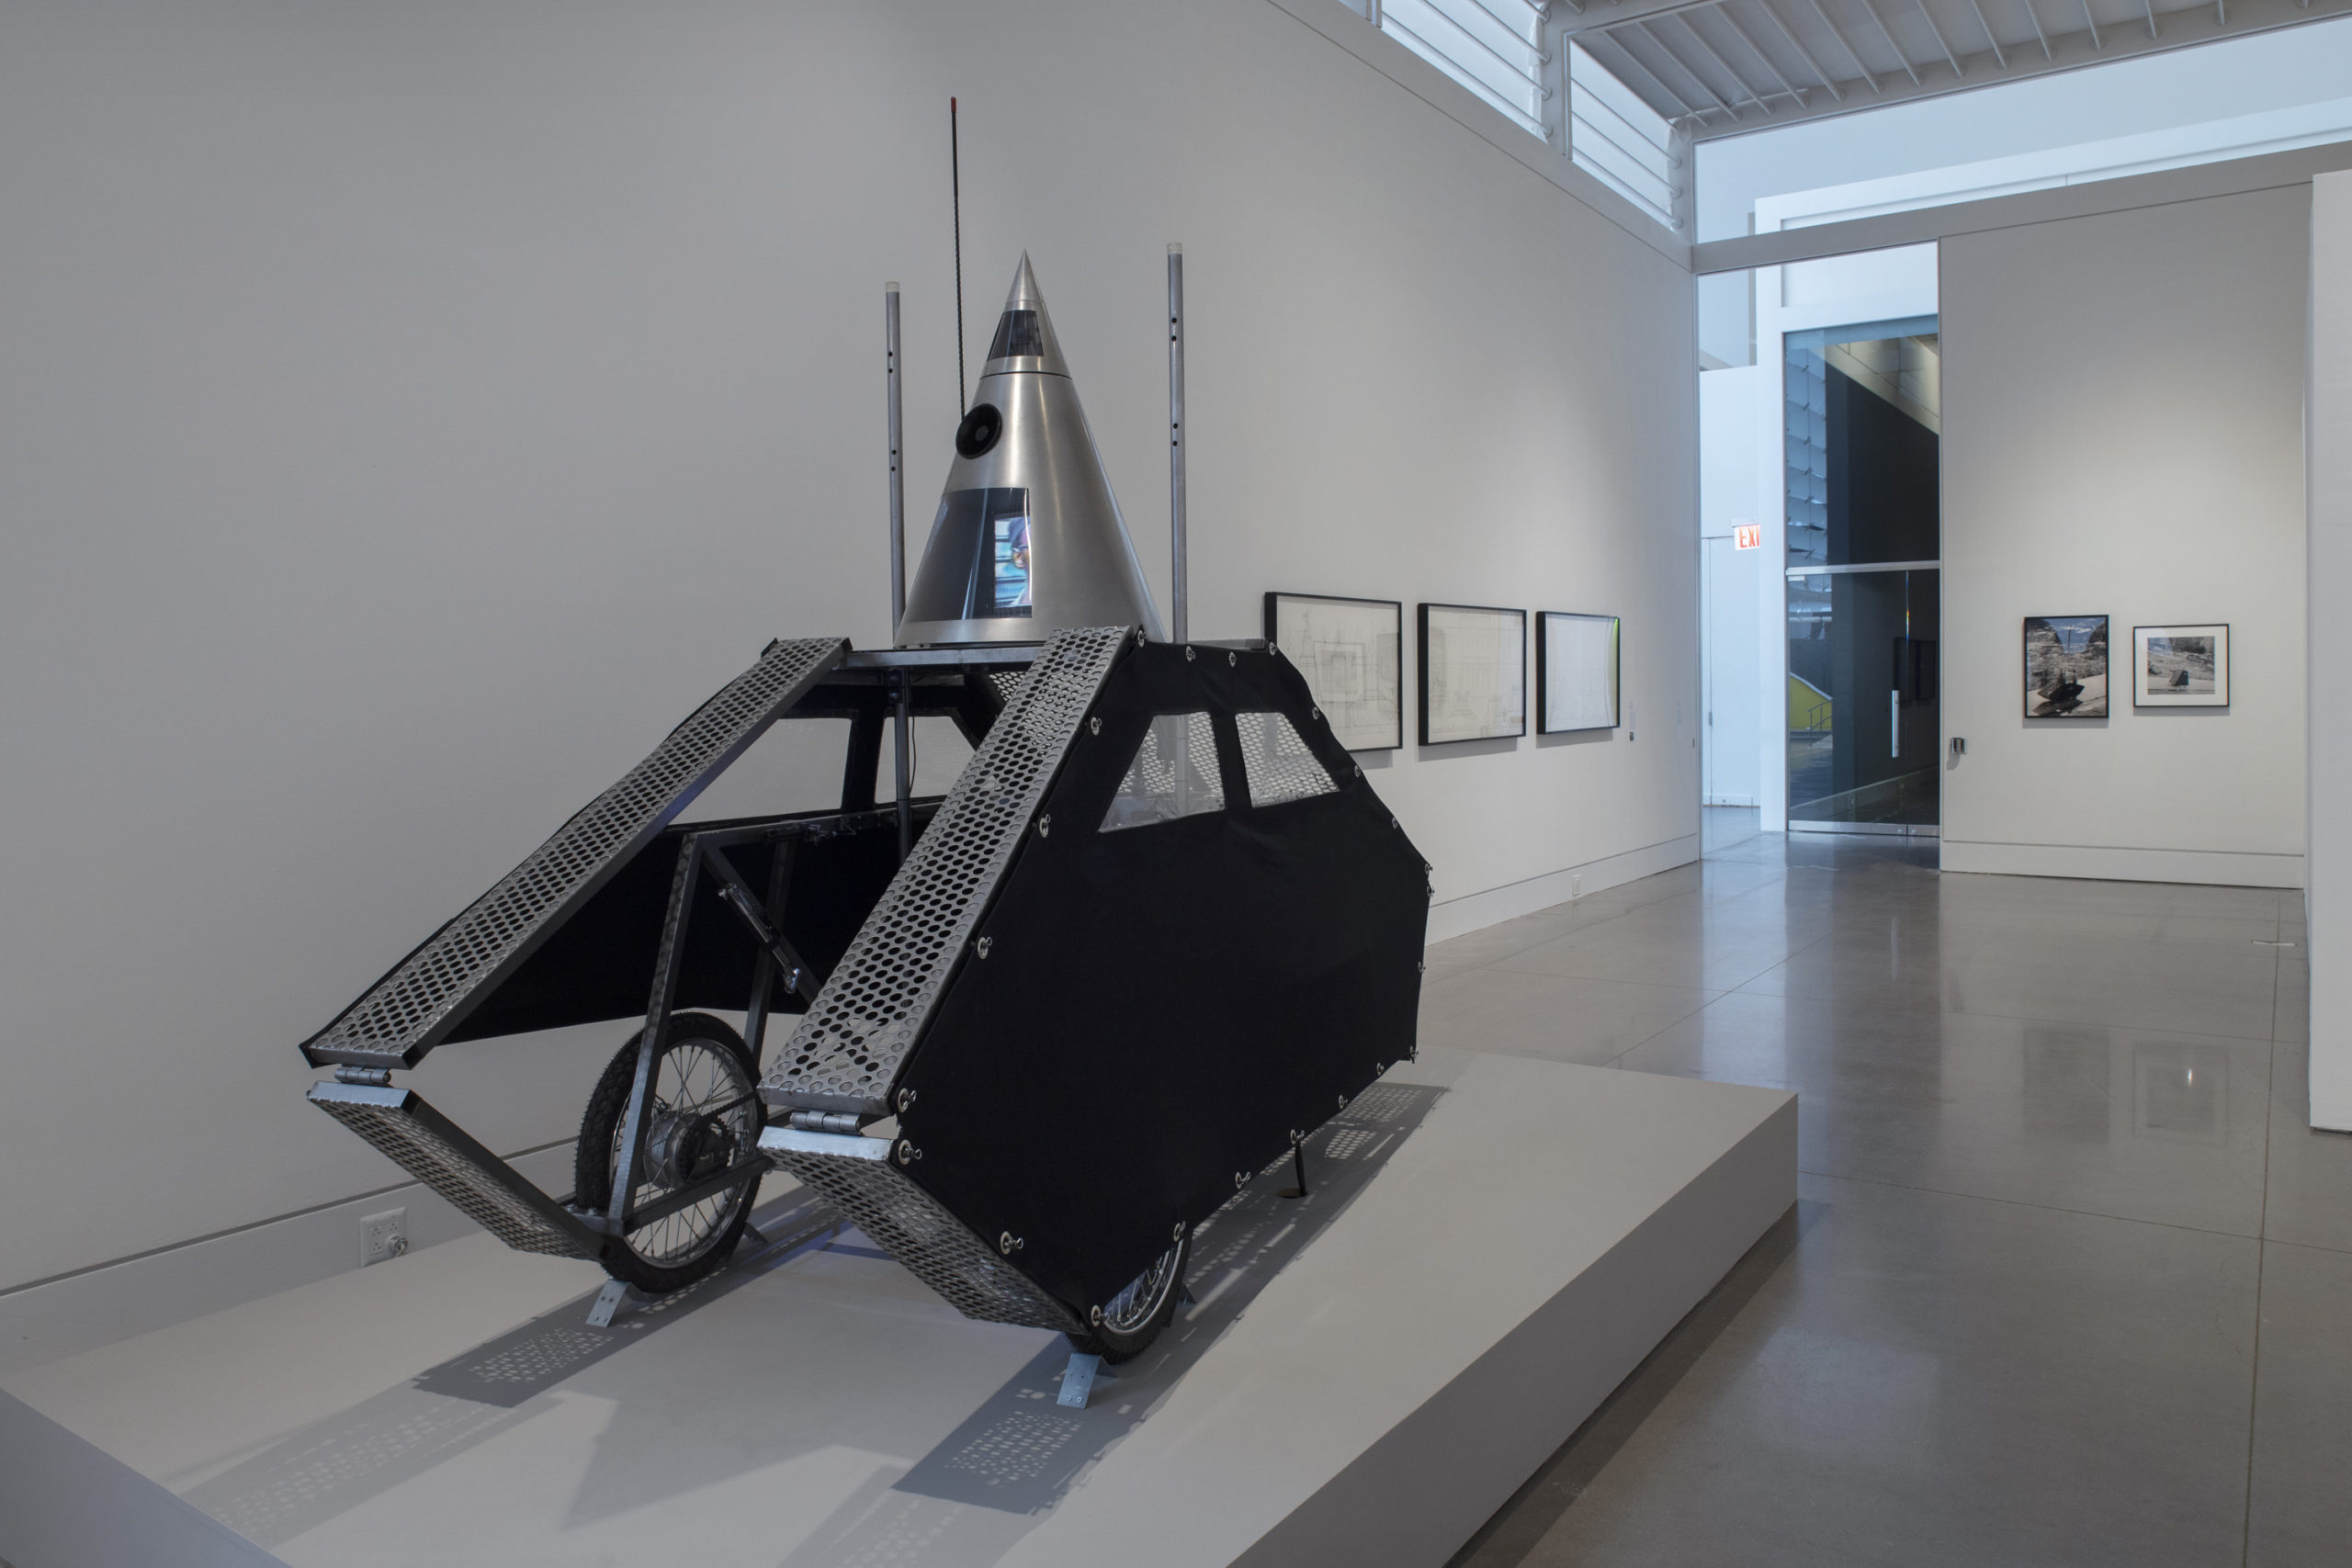 A white exhibition space with a large, low and wide pedestal installed on the floor. On the pedestal sits a sliver and black, mobile sculpture. It has two walls with wheels on the inside, and a silver cone at the top. In the back of the room are two rows of two-dimensional works on display.